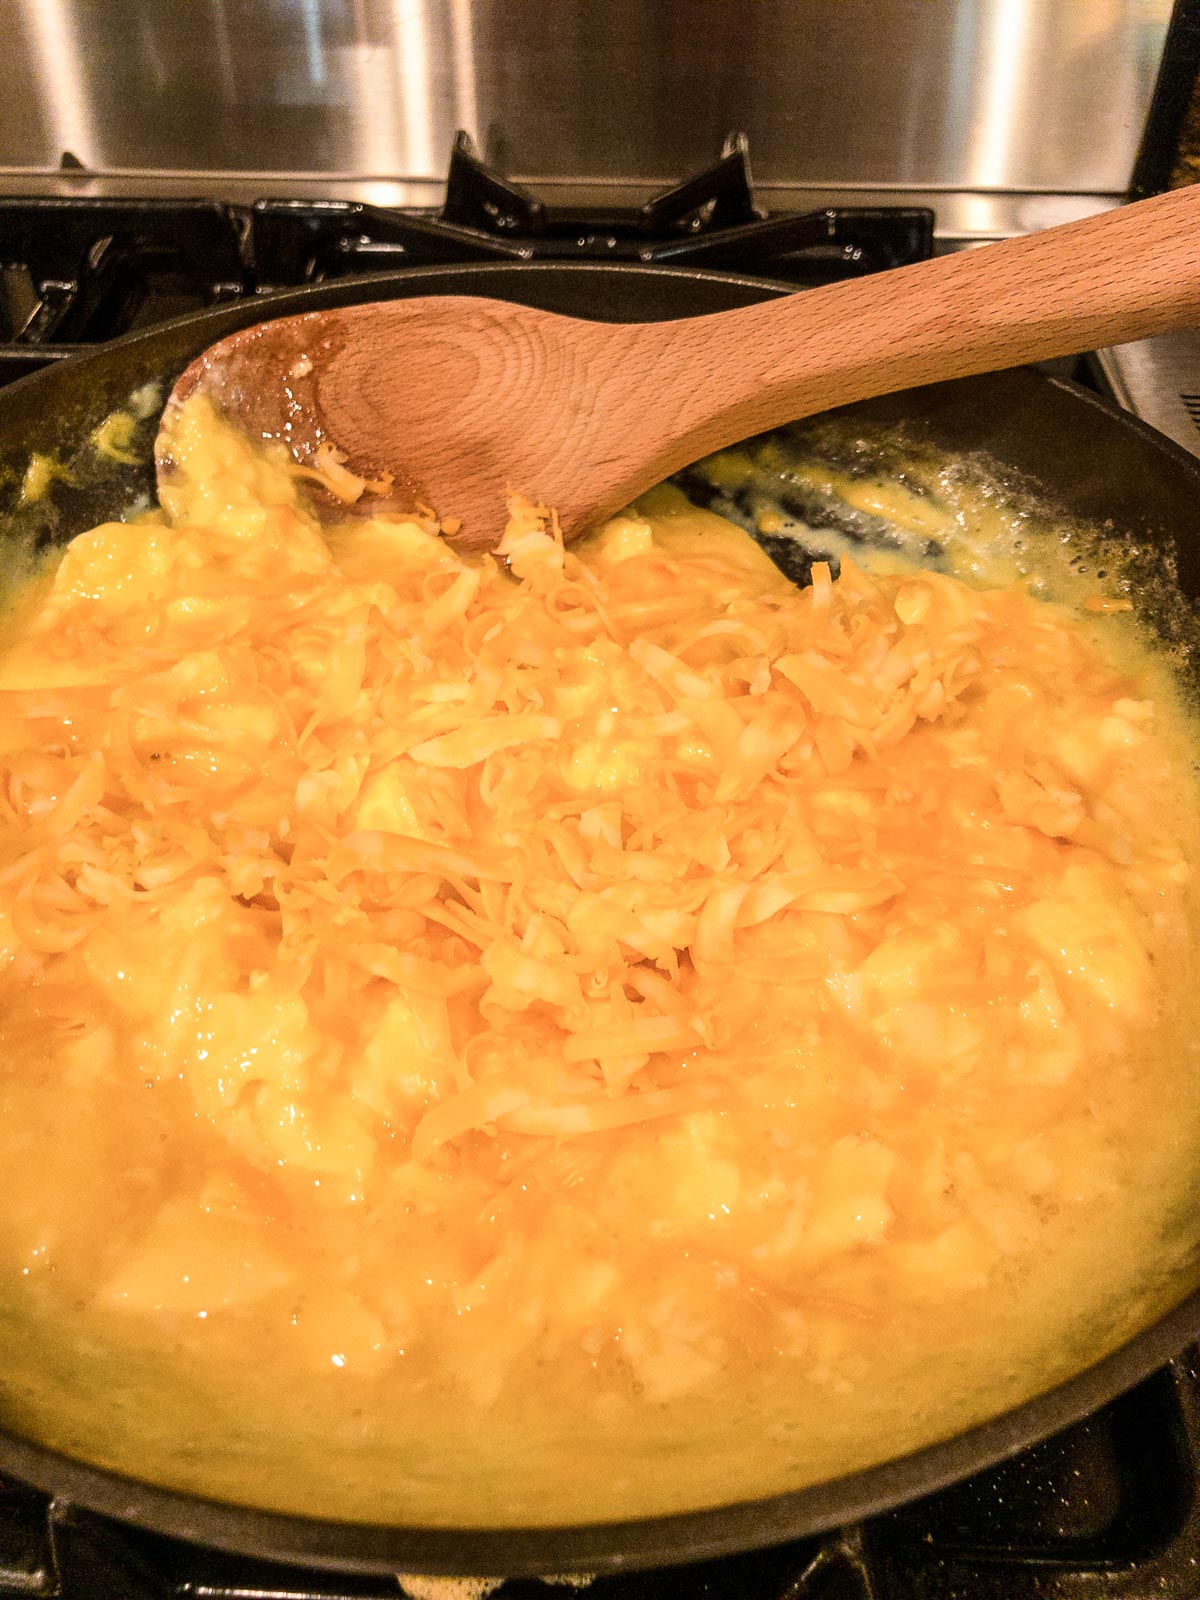 Adding cheese to scrambled eggs in a skillet